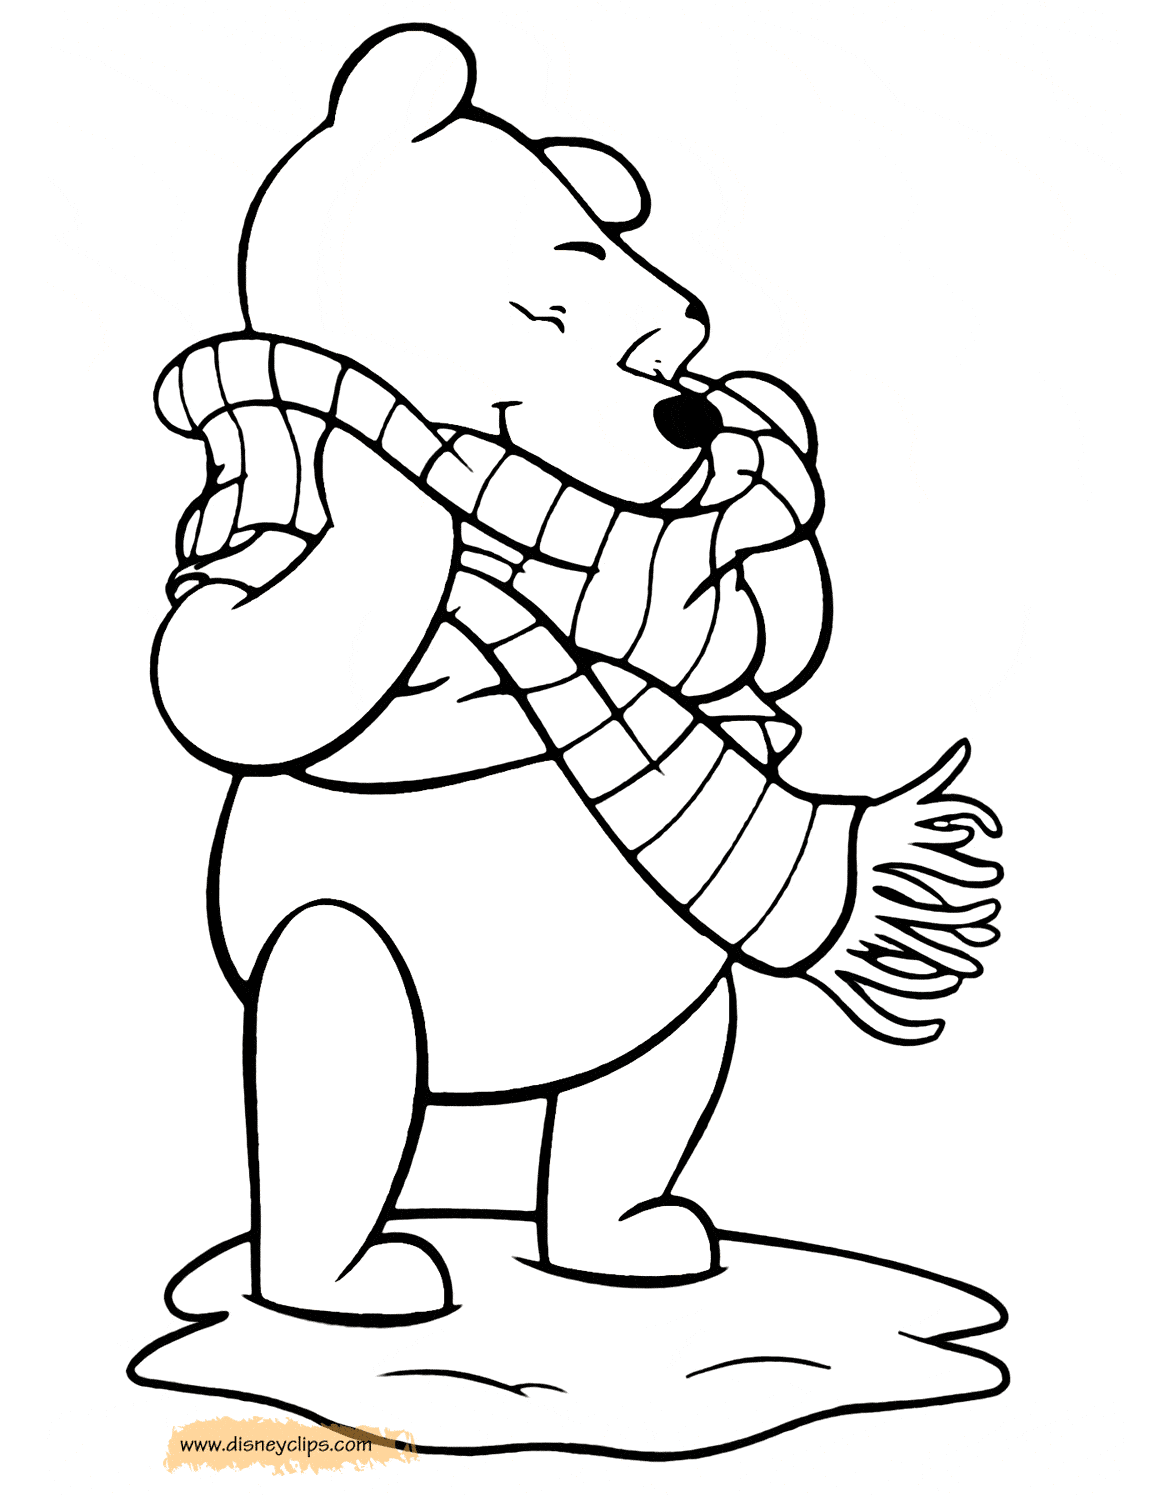 Winnie the Pooh Fall and Winter Coloring Pages   Disneyclips.com